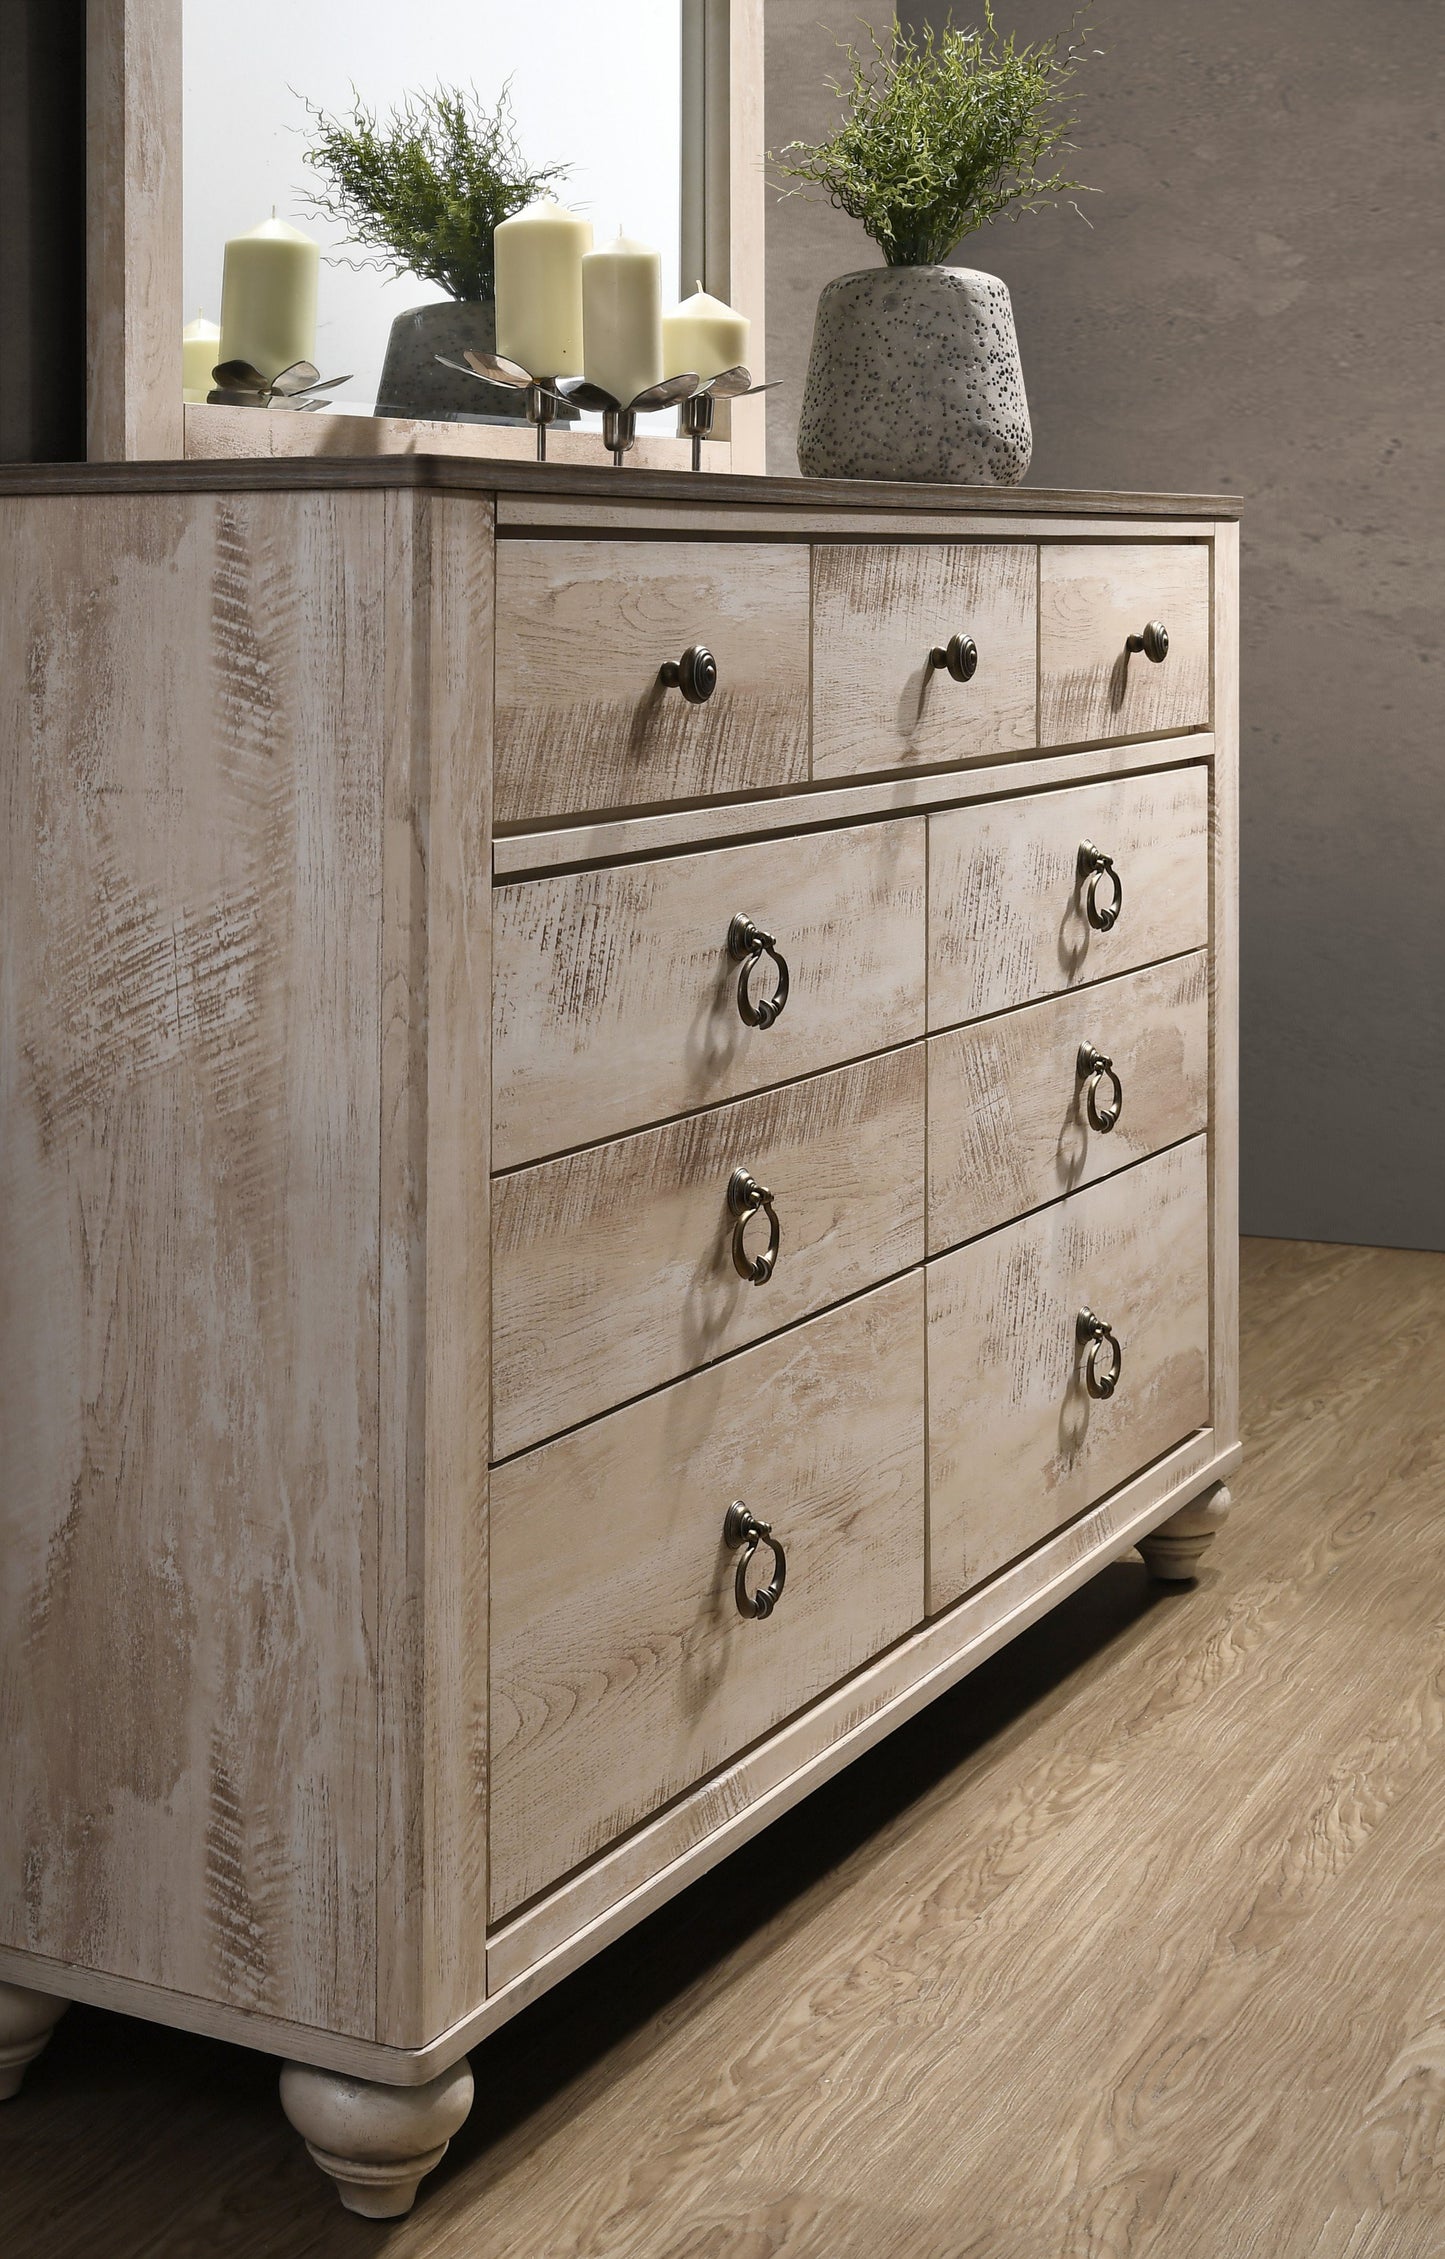 Imerland Contemporary White Wash Finish Patched Wood Top 7-drawer Dresser and Mirror